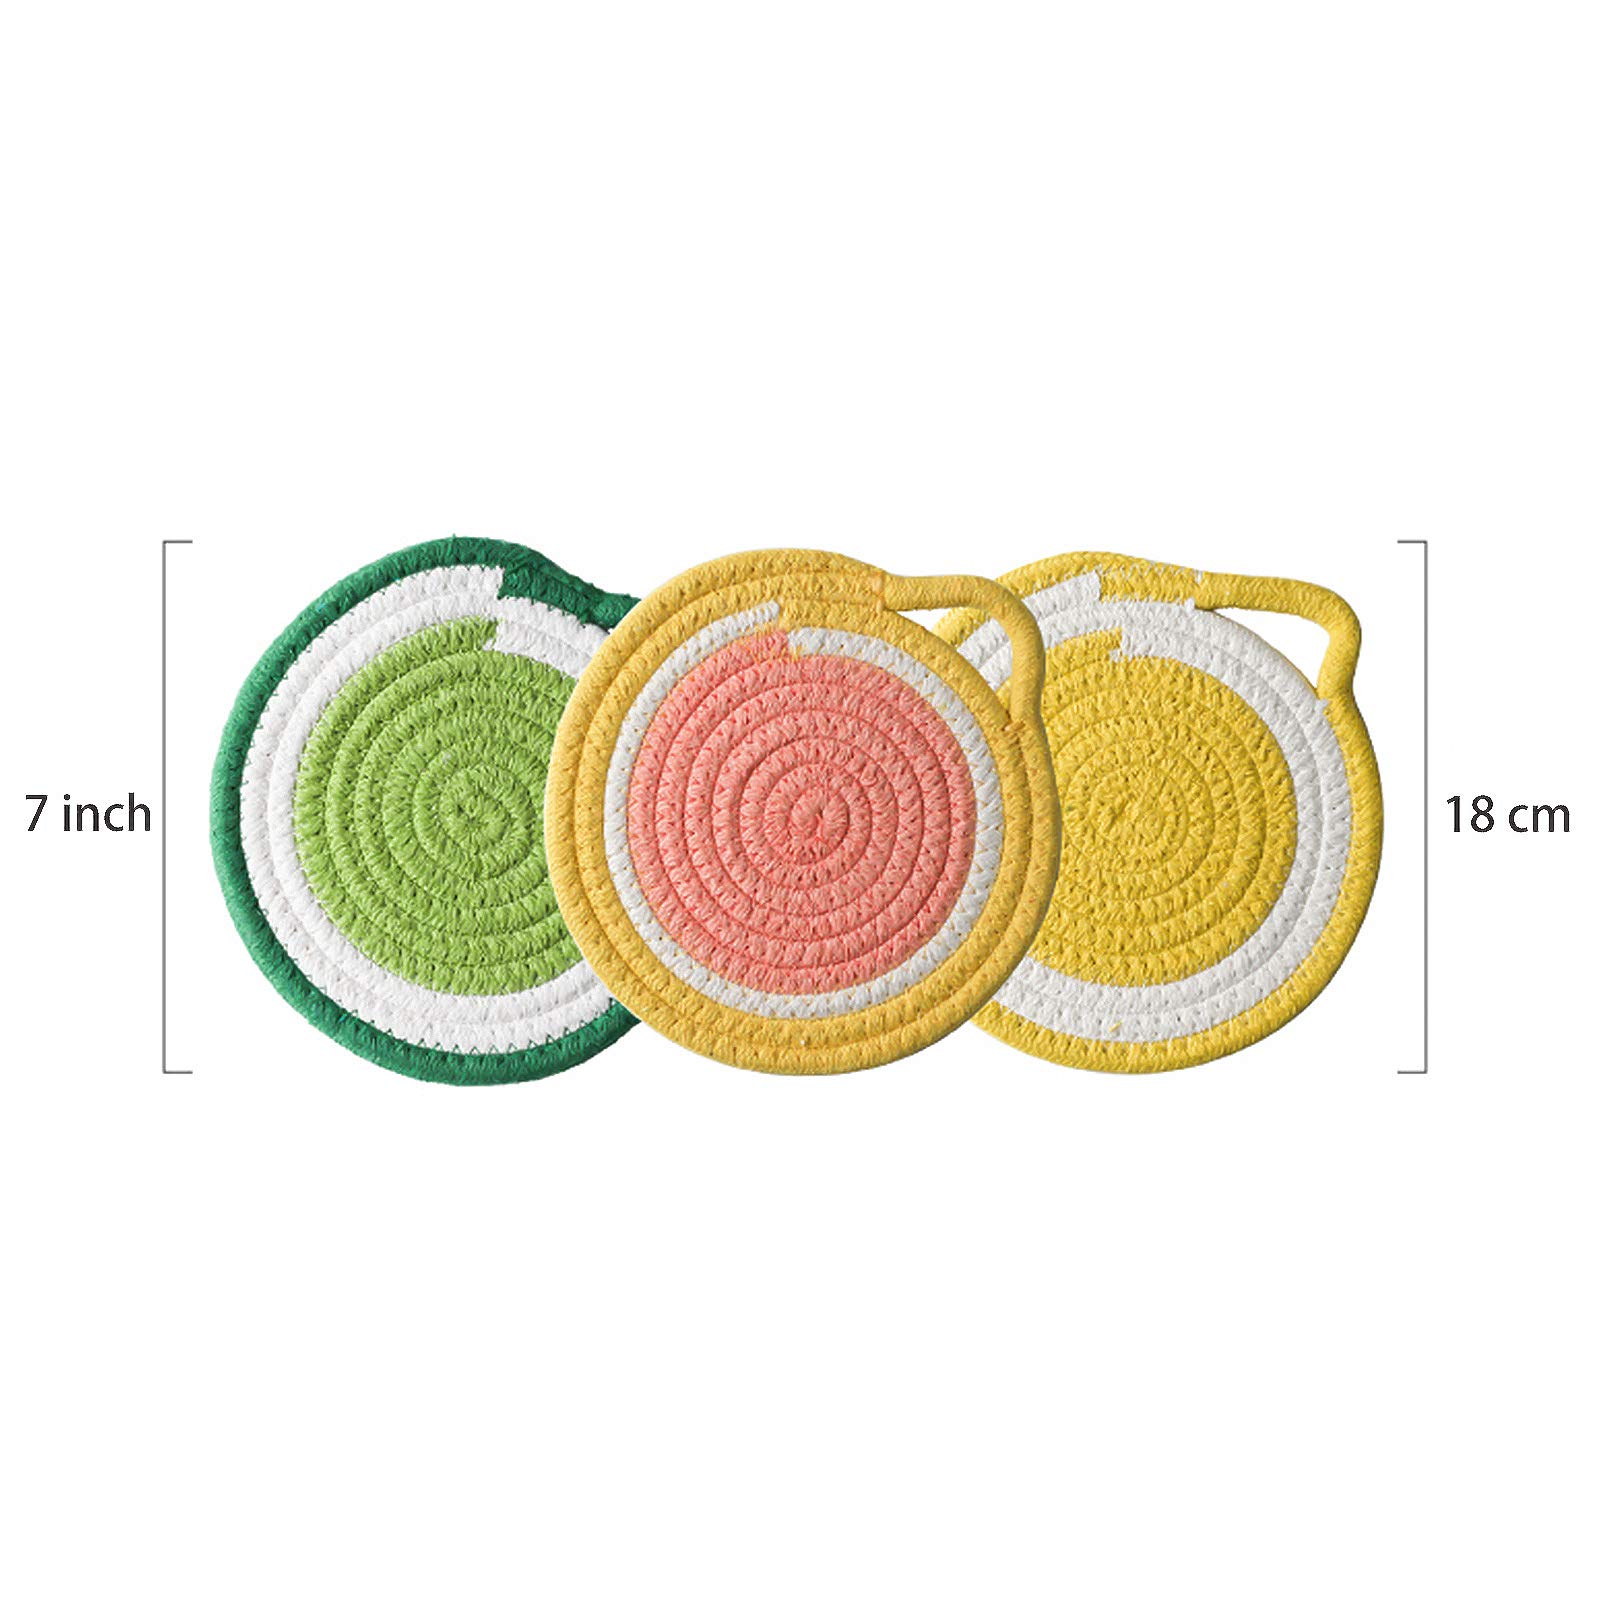 Kitchen Pot Holders Set Trivets Set, Cotton Thread Weave Hotpads for Cooking (Set of 3) Stylish Coasters, Placemat, Thick Hot Pads, Hot Mats, Spoon Rest, Baking, Round Pad 7 Inches